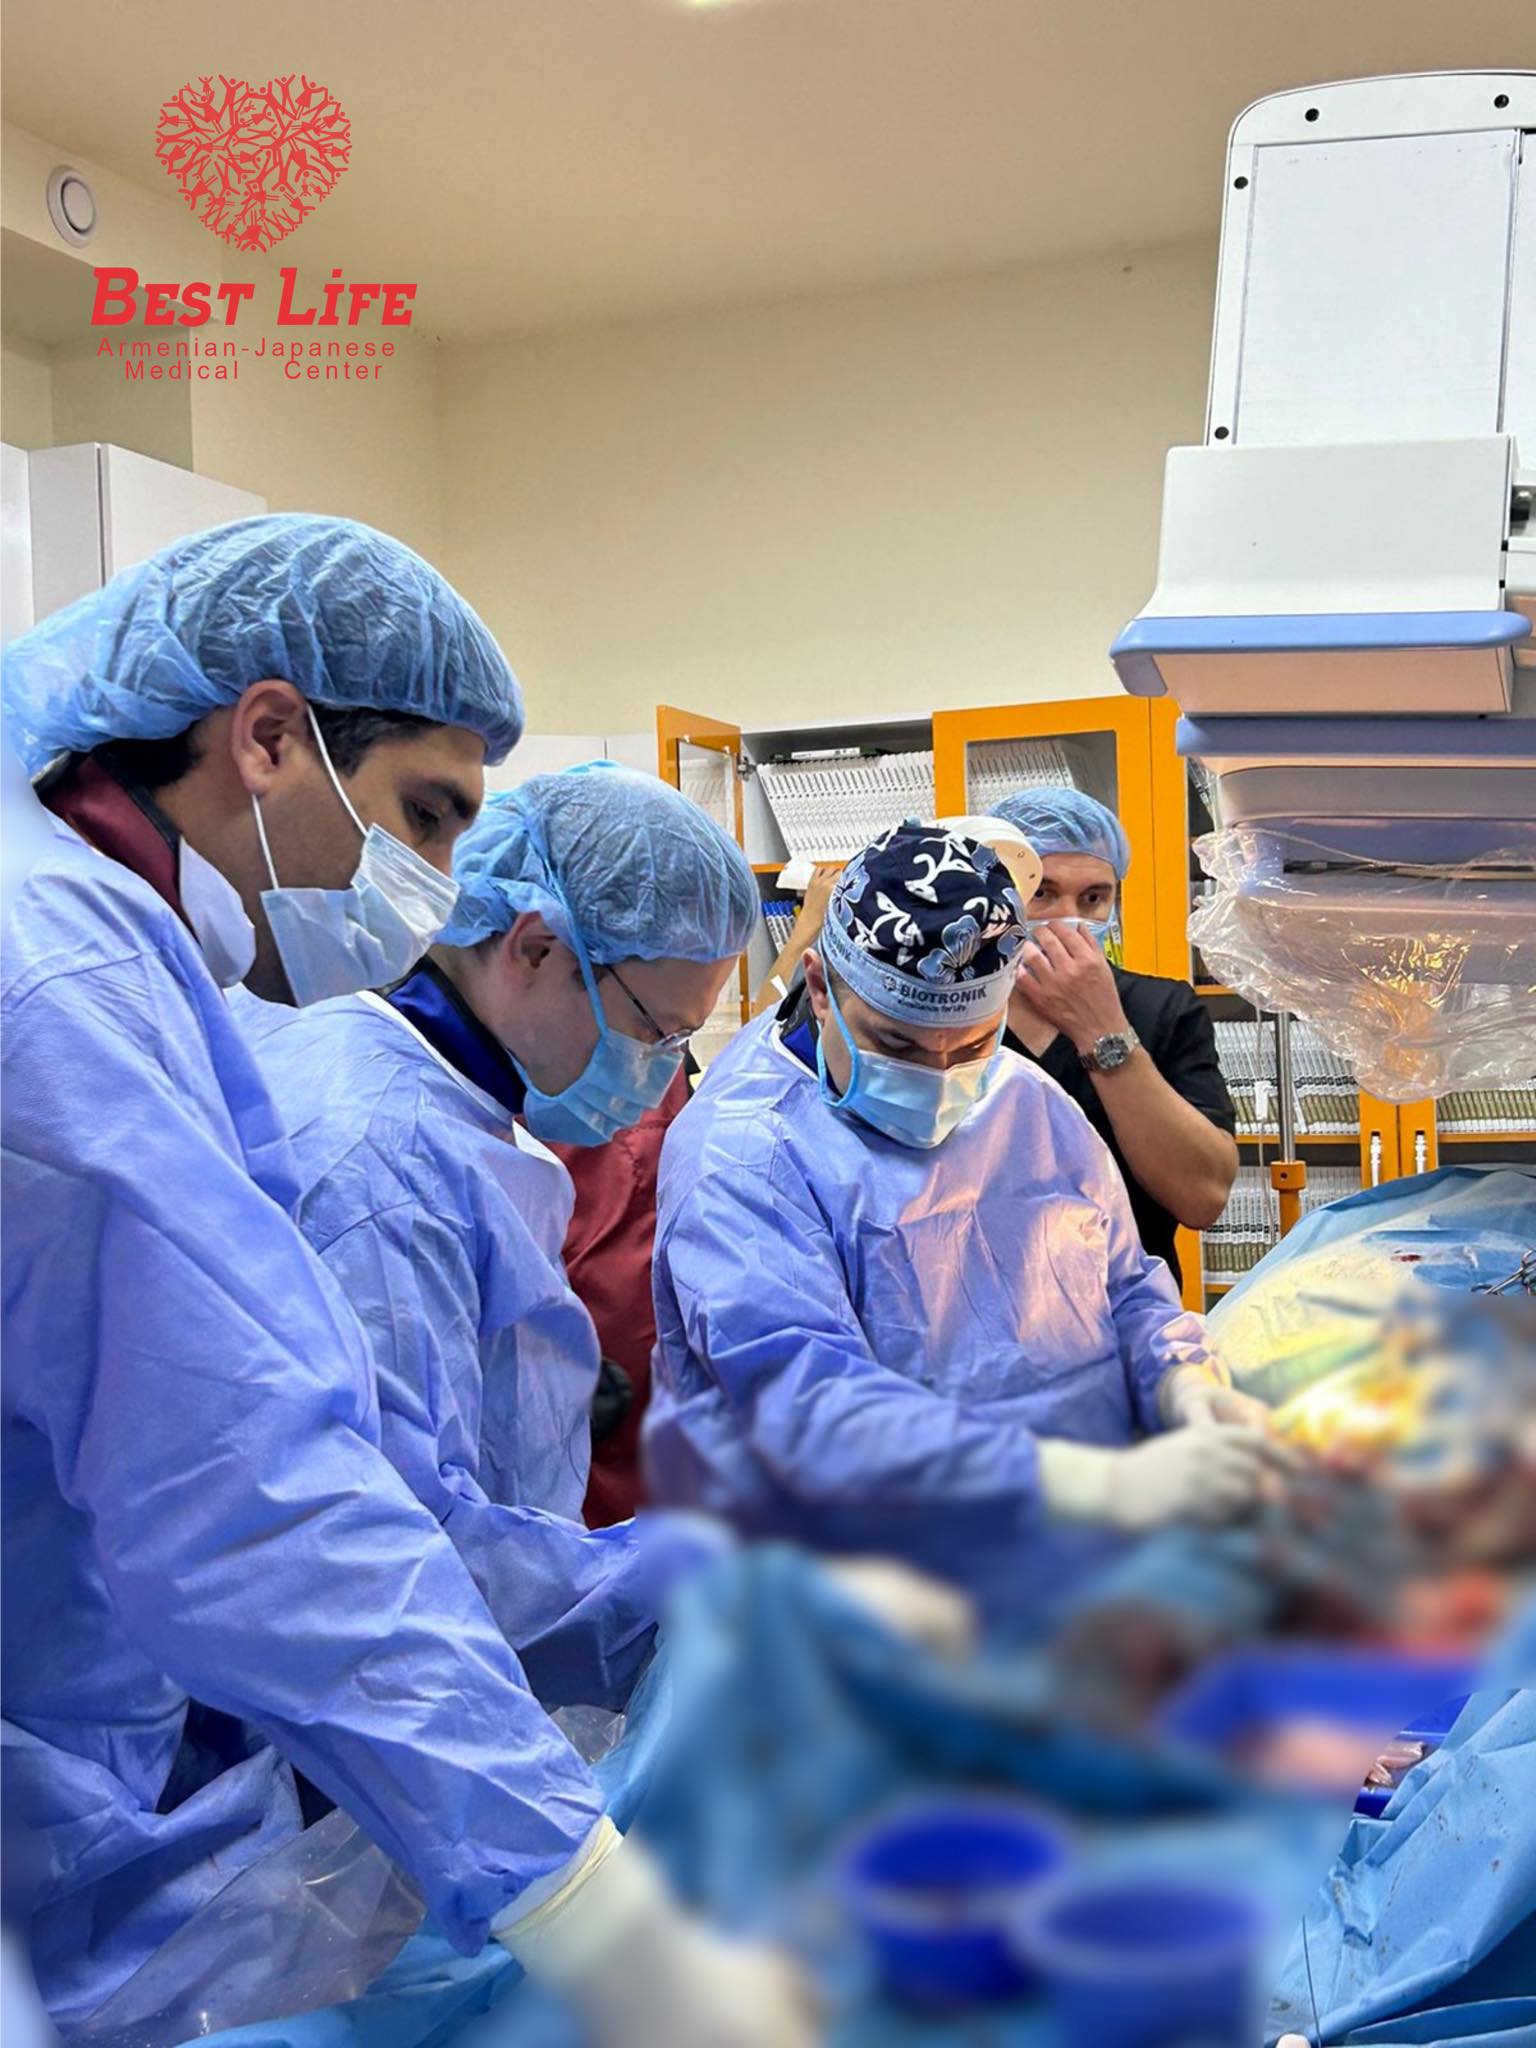 For the first time, endovascular prosthetics of a large aortic aneurysm was performed at 